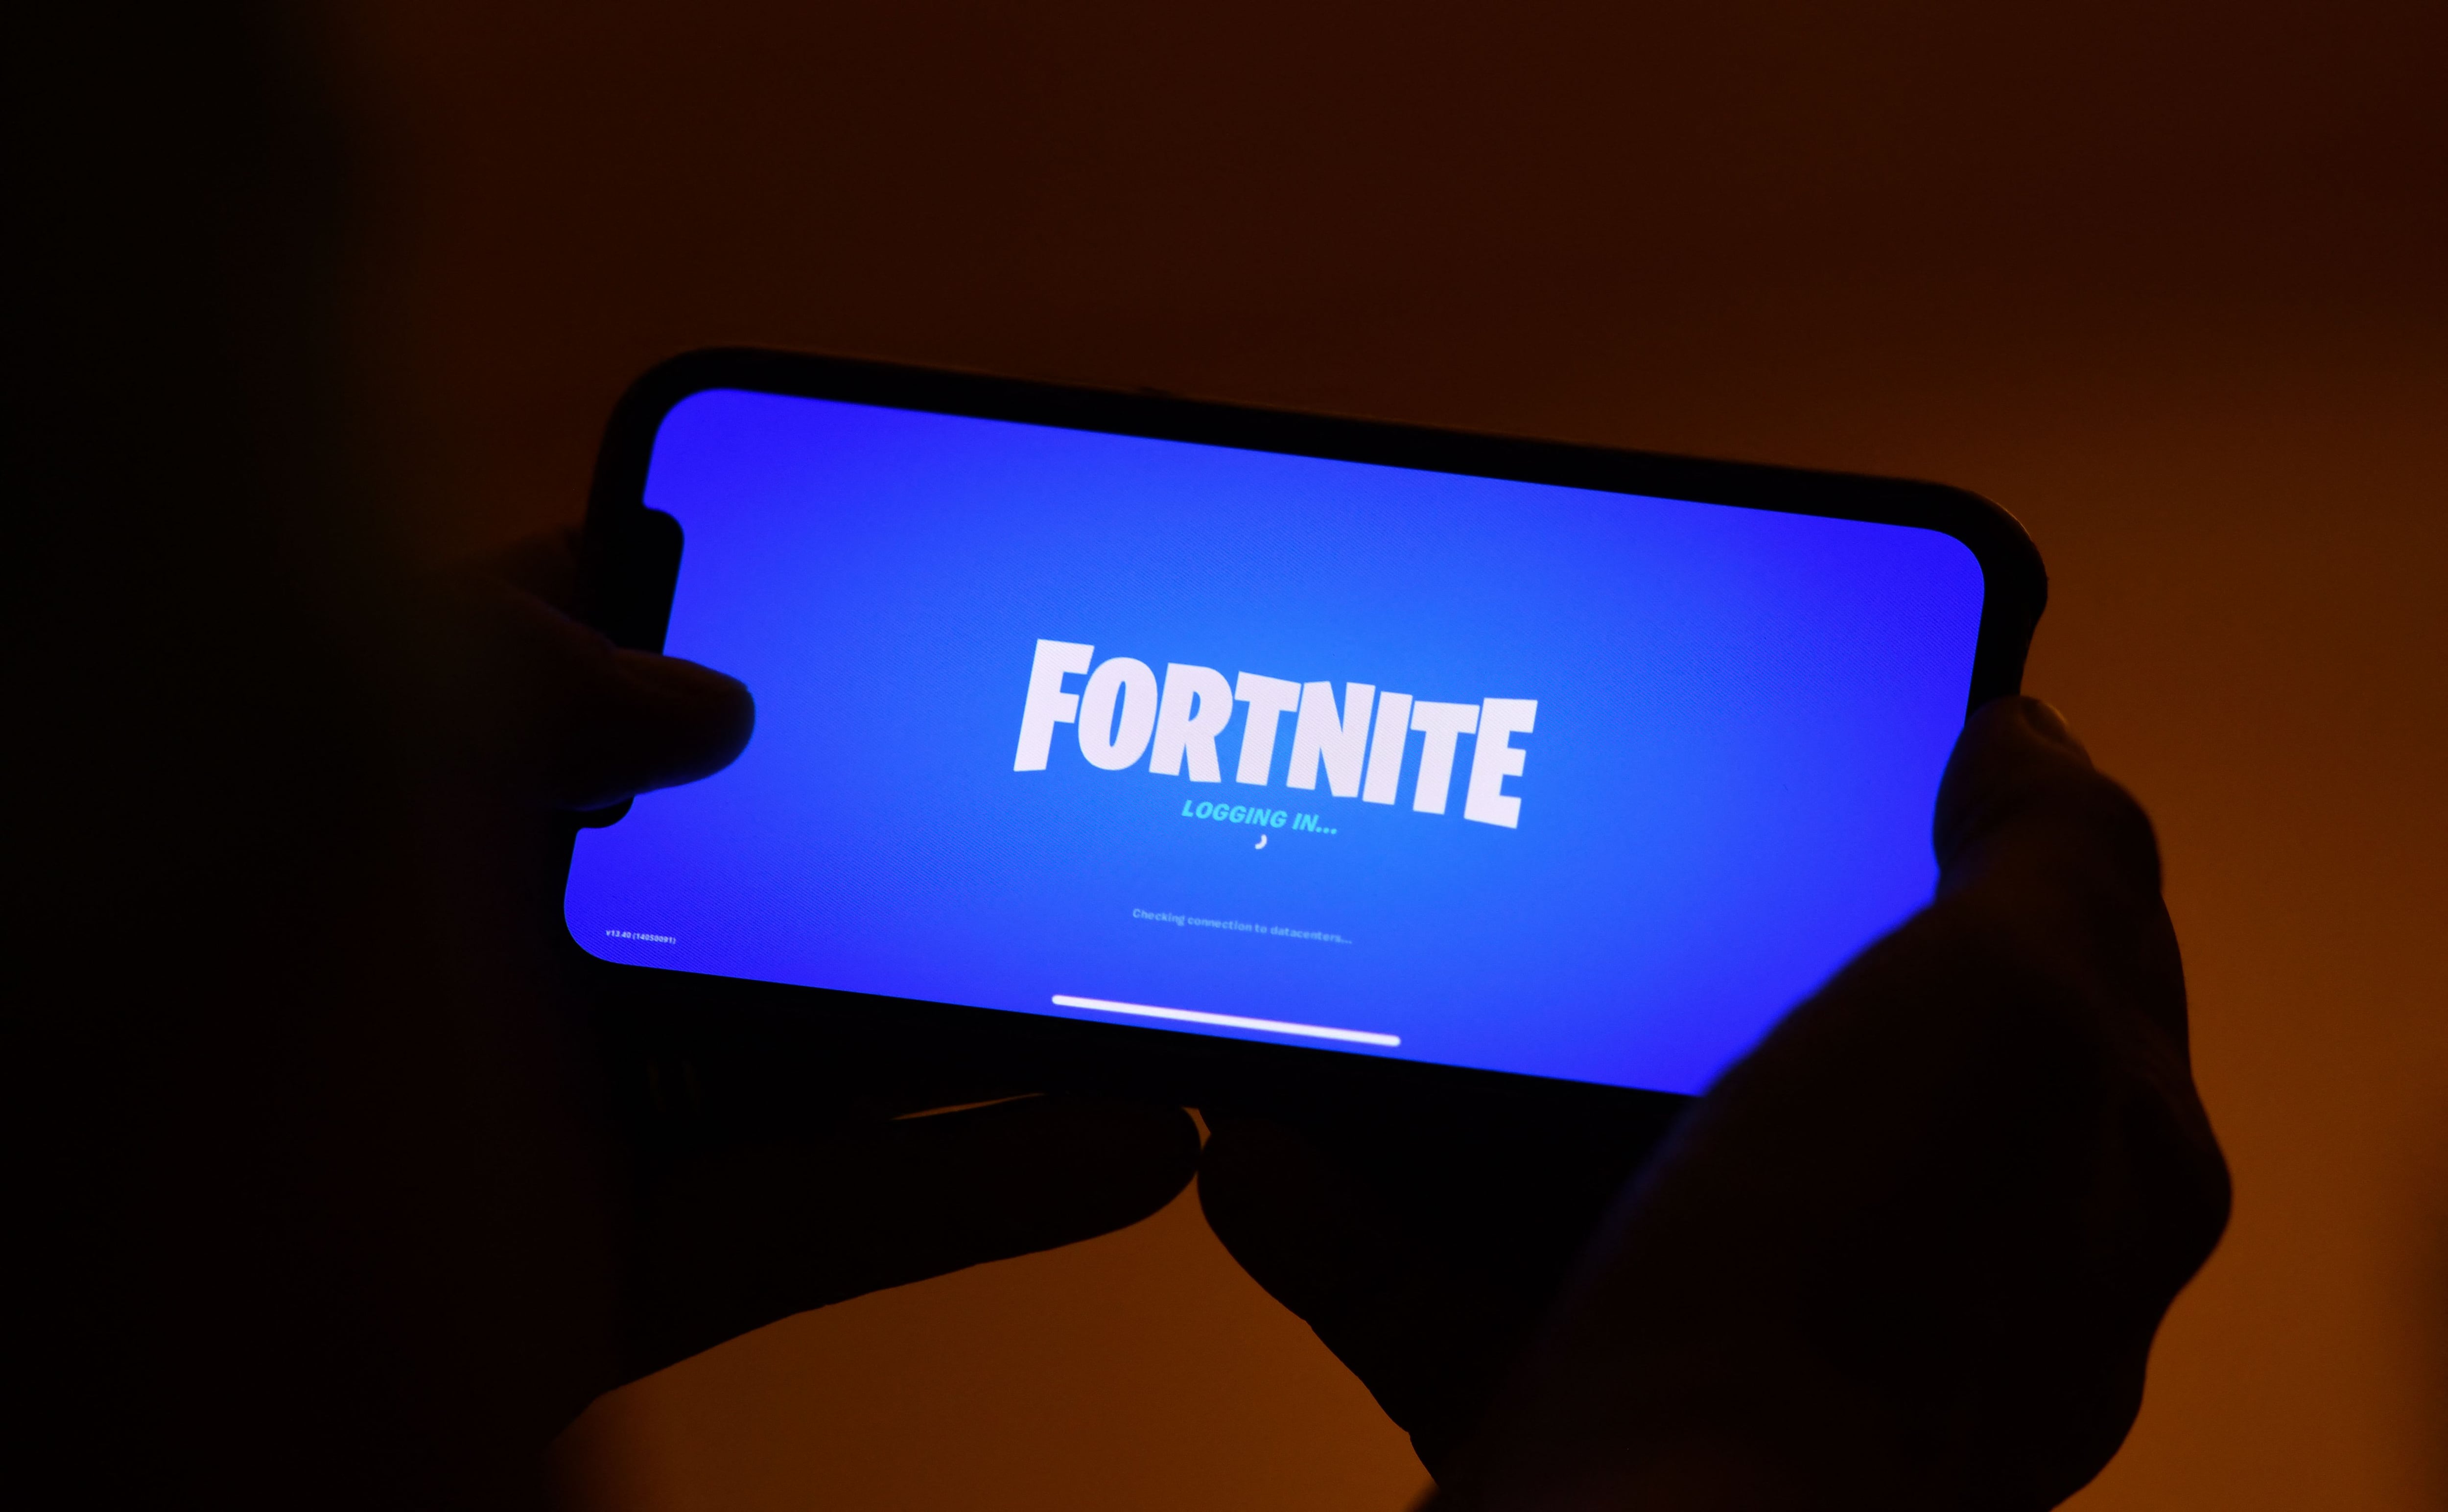 Fortnite on an Apple device.